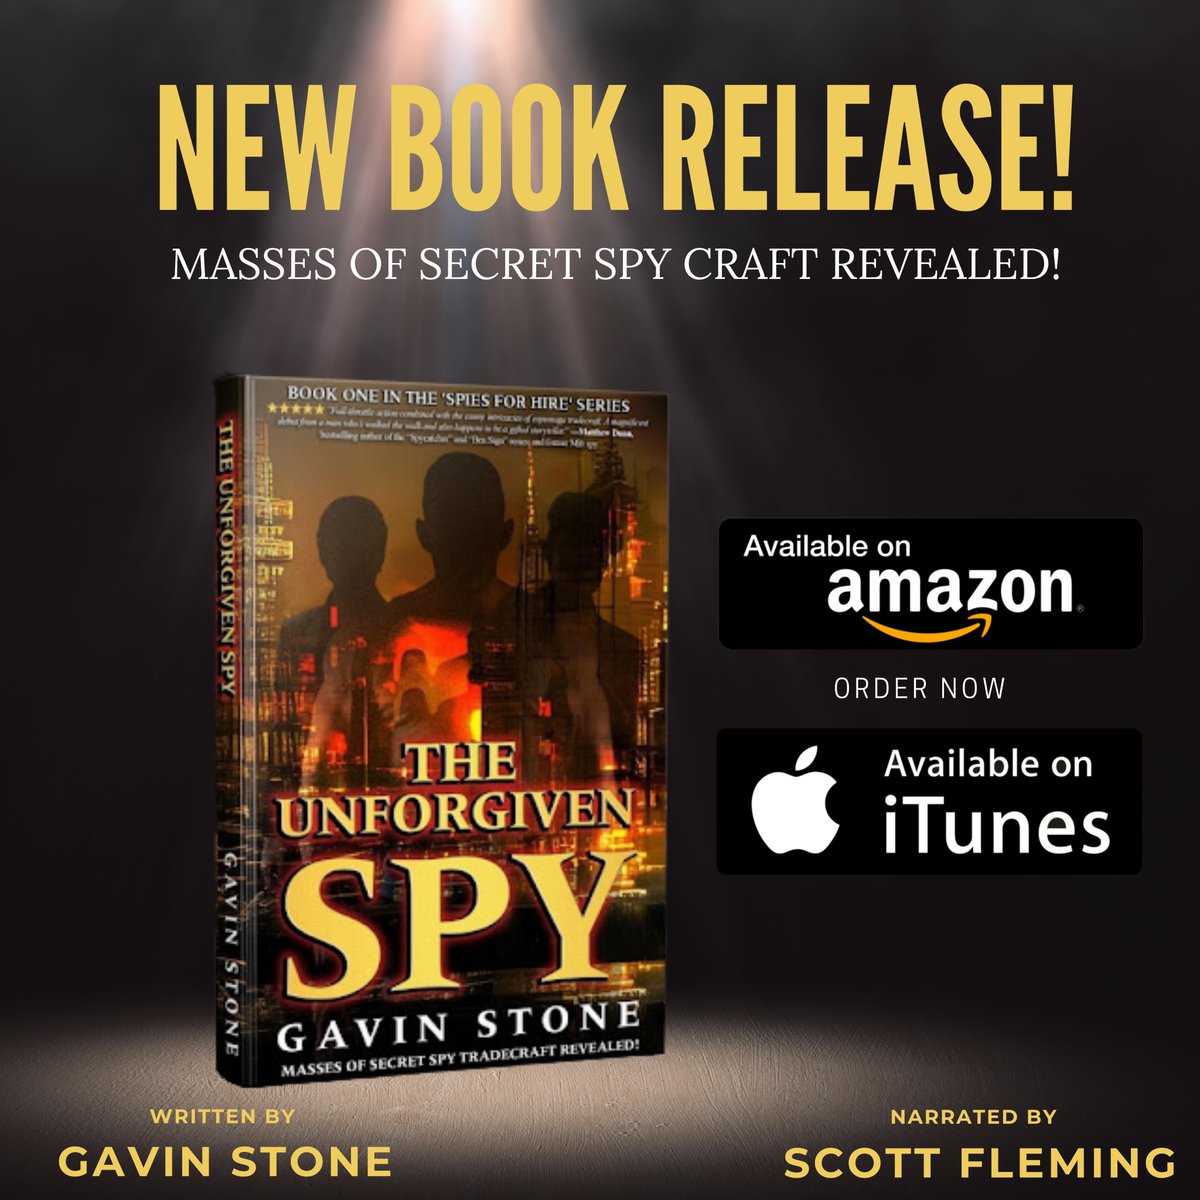 amazon.com/Unforg.../dp/B…...
The Audiobook is out now! I'm so excited, Scott Fleming did an amazing job and he definitely deserves praise for the fantastic work he out in
#spies #SpiesInDisguise #spiesforhire #spyxfamily #theunforgivenspy #spyxfamily #gavinstone #Spyscape